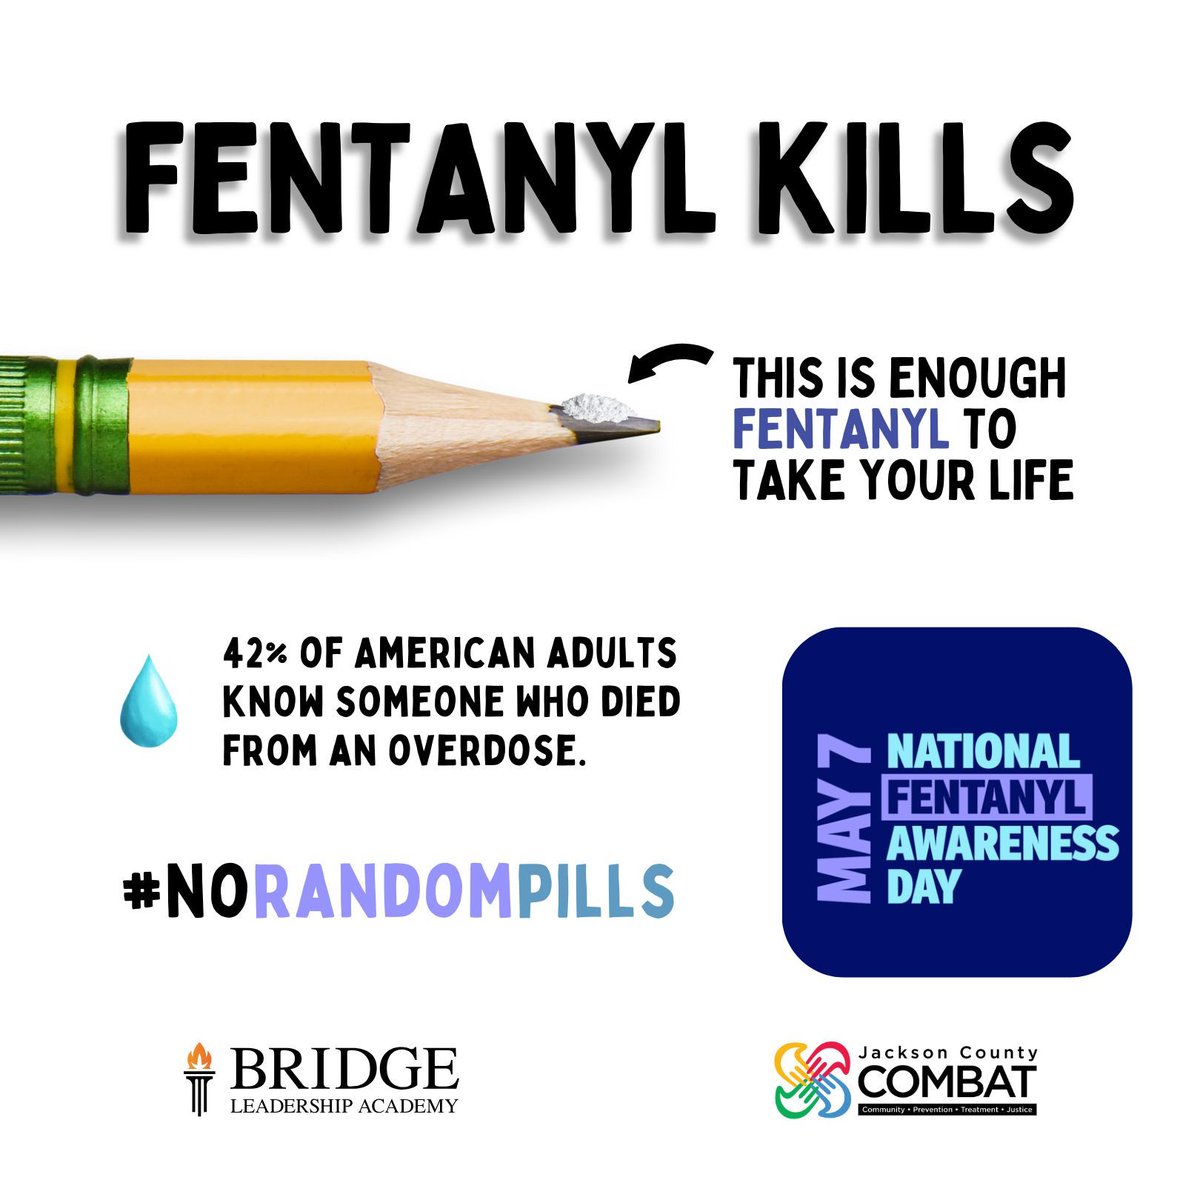 Fake pills and fentanyl have changed the drug landscape and are driving the recent increase in US drug overdose deaths. Learn more at buff.ly/3N2KlMs and spread the word to save a life. #NoRandomPills #NationalFentanylAwarenessDay